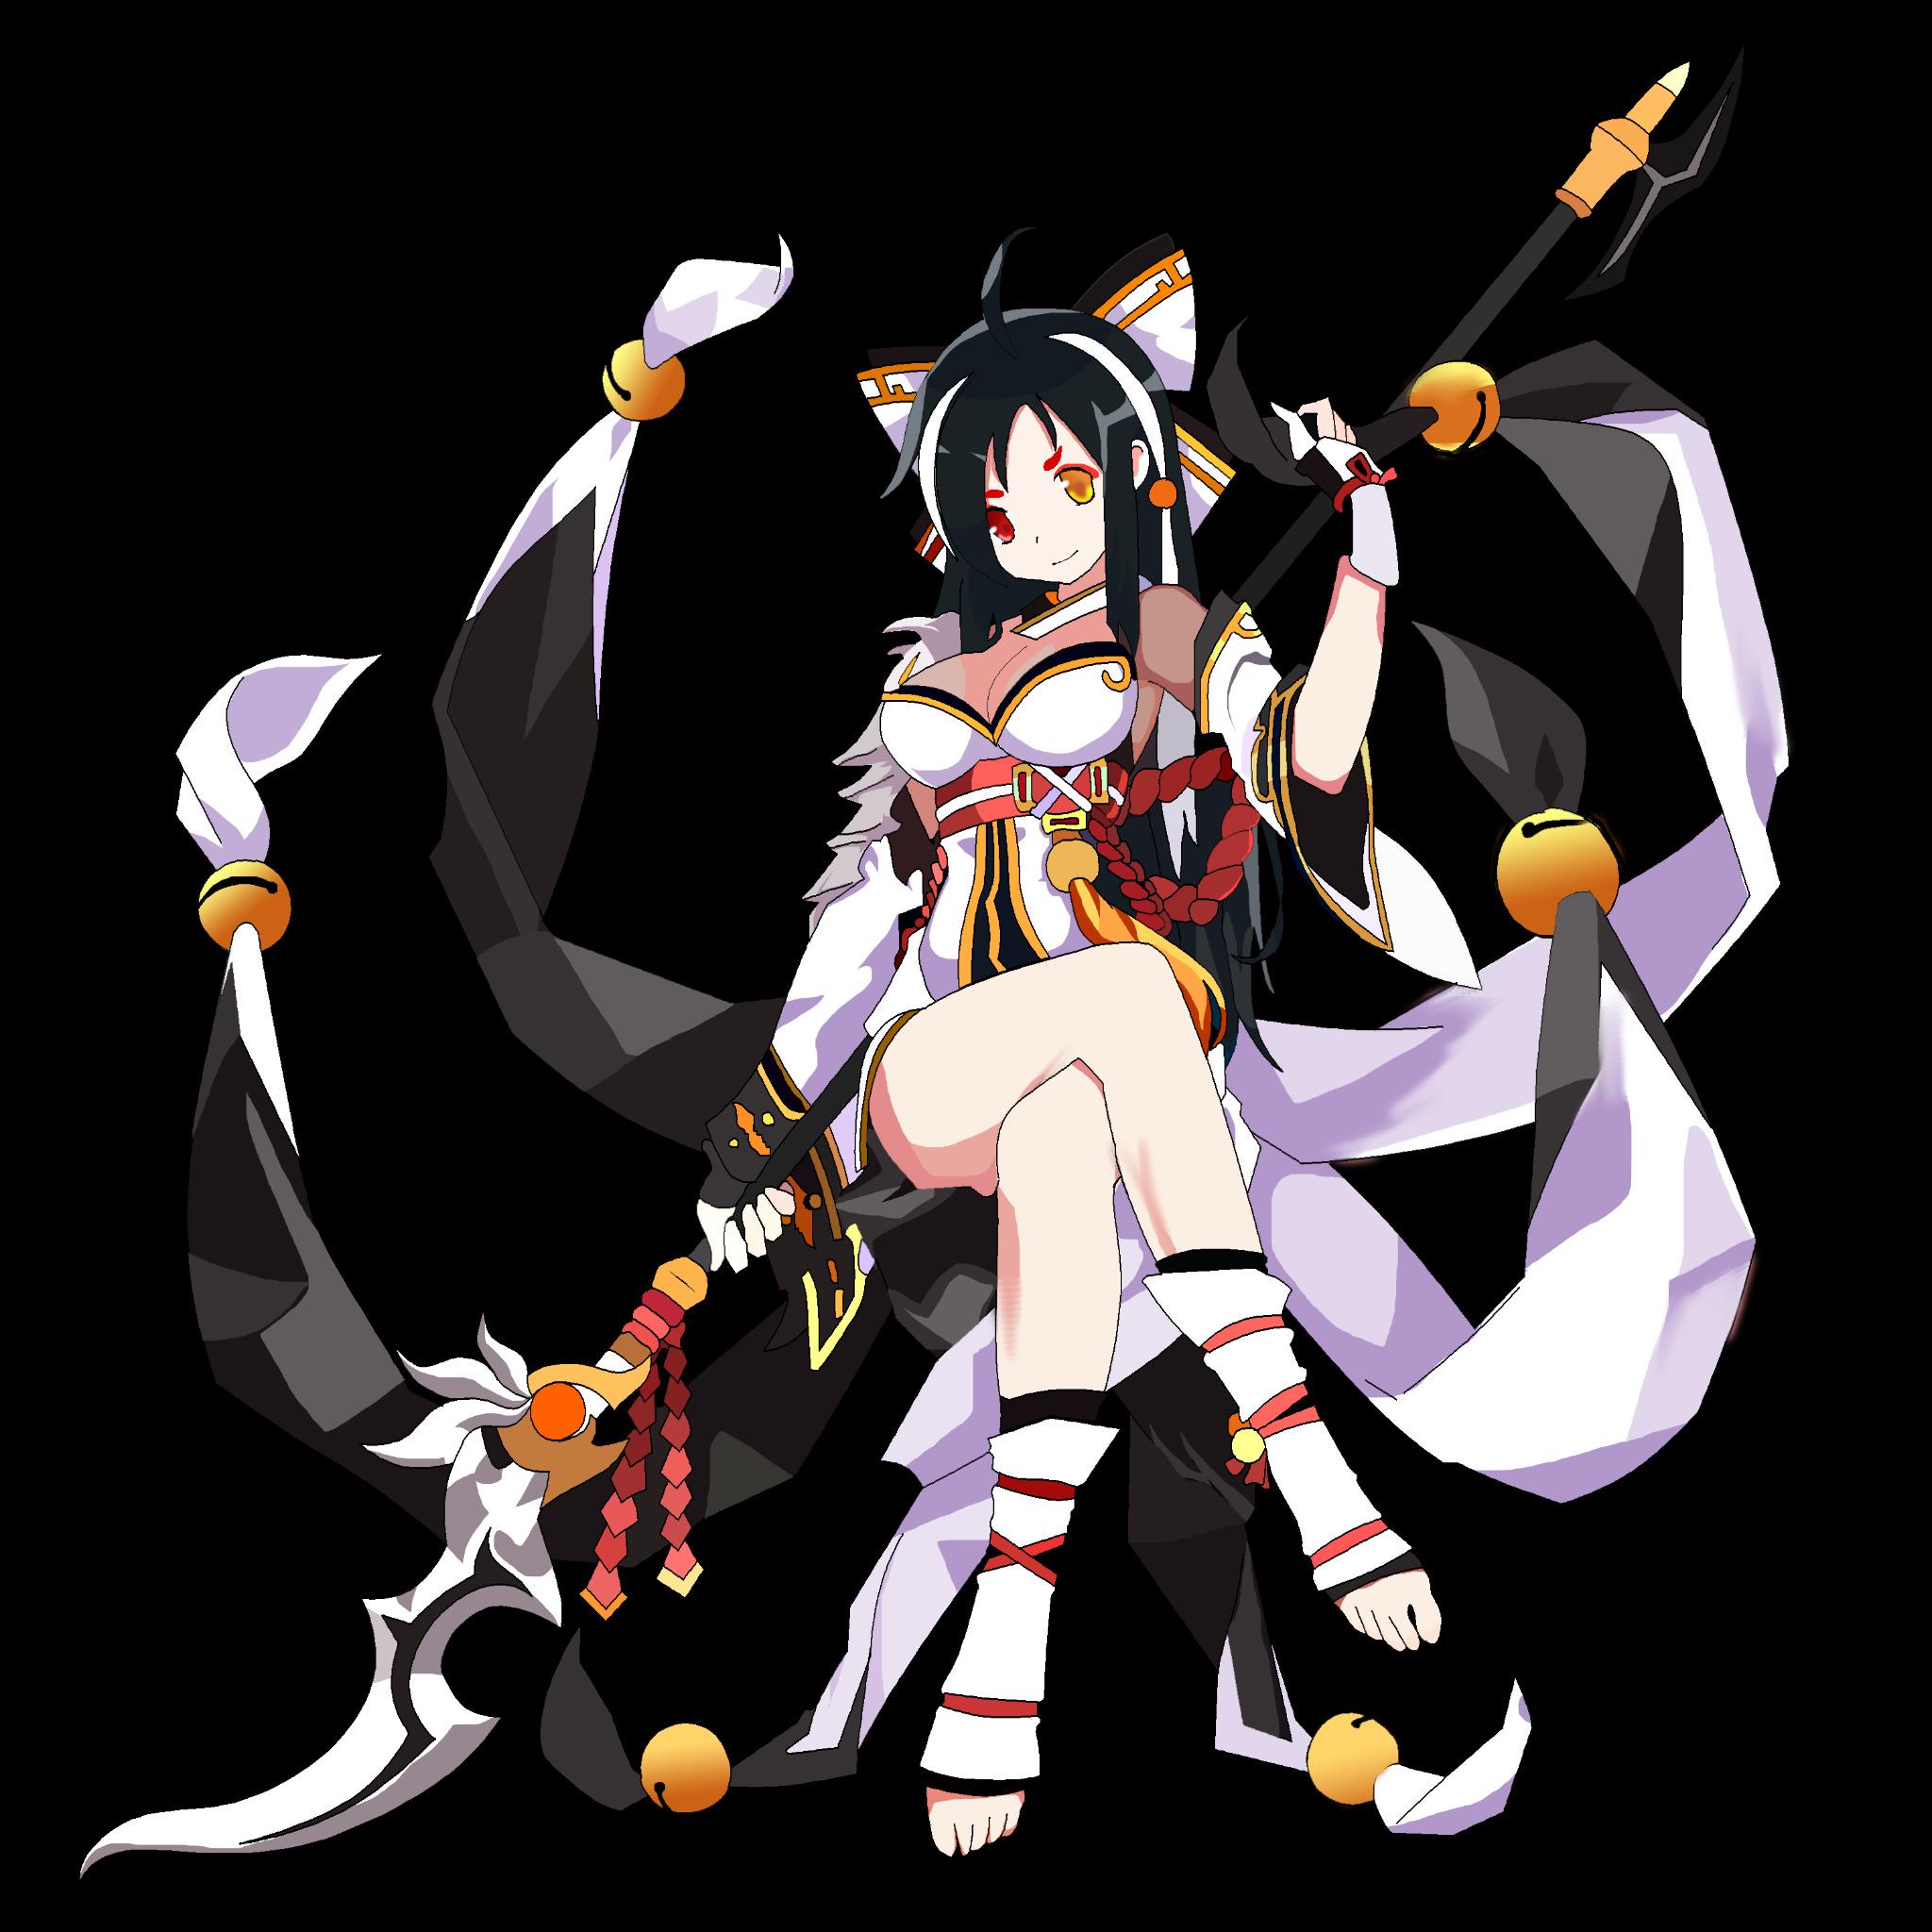 Fizzy on Twitter: "Ara Haan (Asura Form) #anime #drawing #photoshop #elsword http://t.co/TwIcus5bbf"